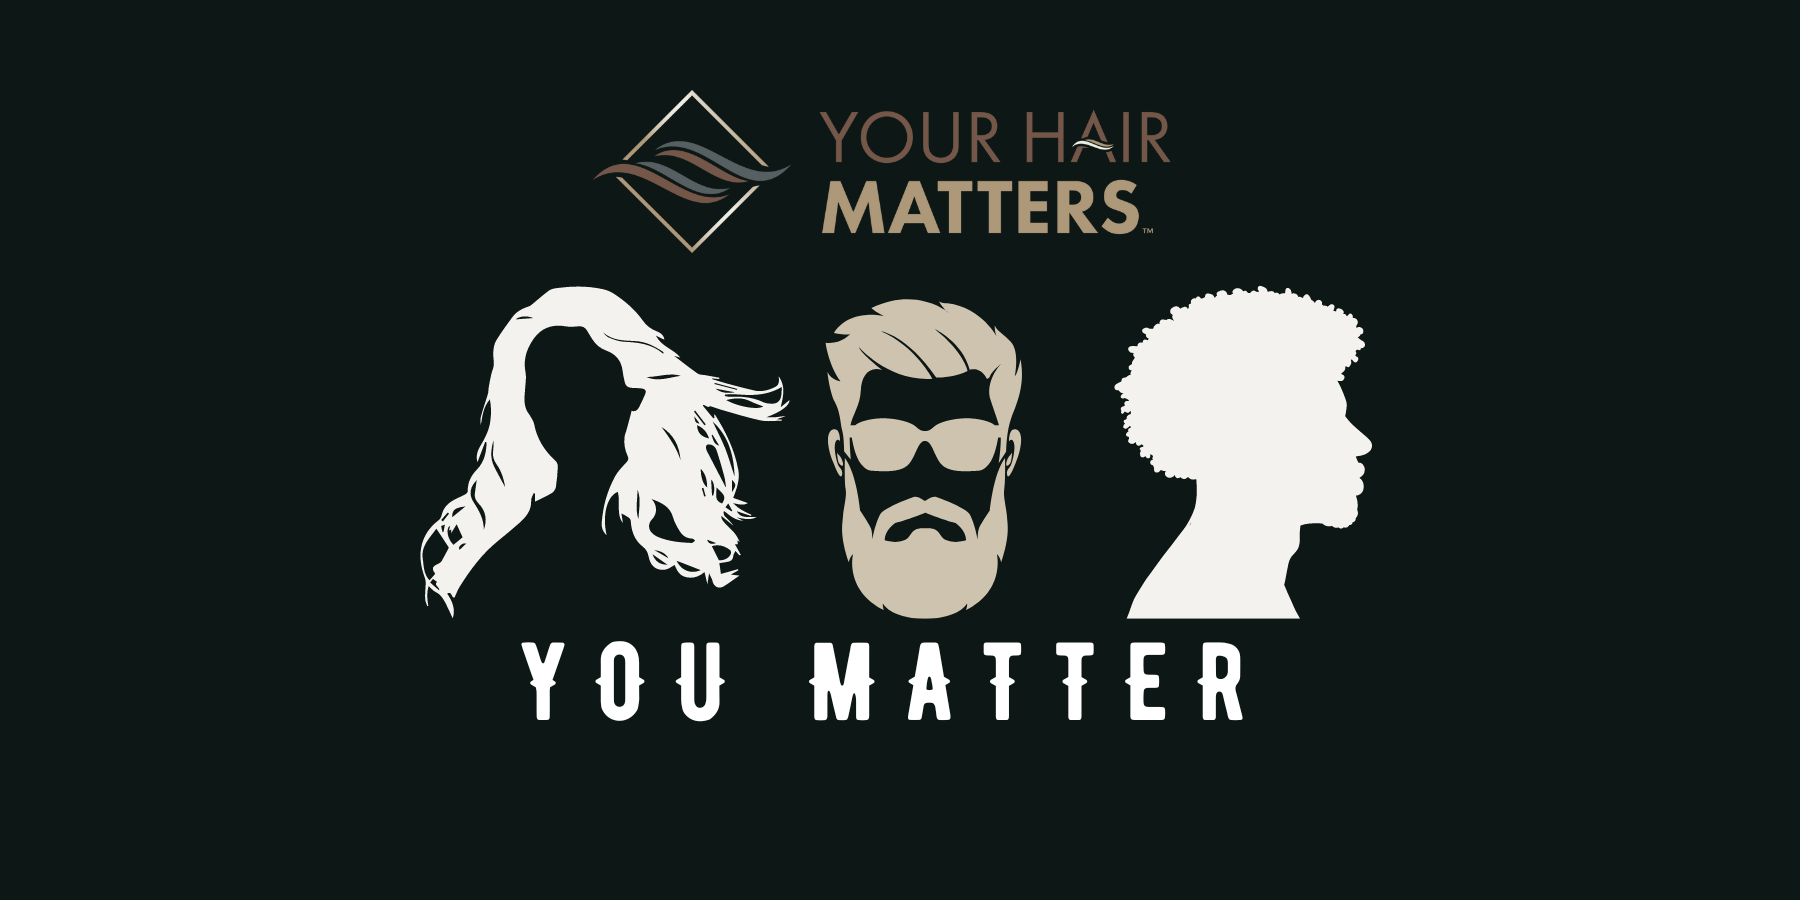 Best Hair System Supplier for Hair Replacement Salons | Men and Women Non- Surgical Hair Replacement | Your Hair Matters | Men's and Women's Hair Loss Solutions | Men's Hair Systems | Women's Wigs | Toupees | Hair Pieces 